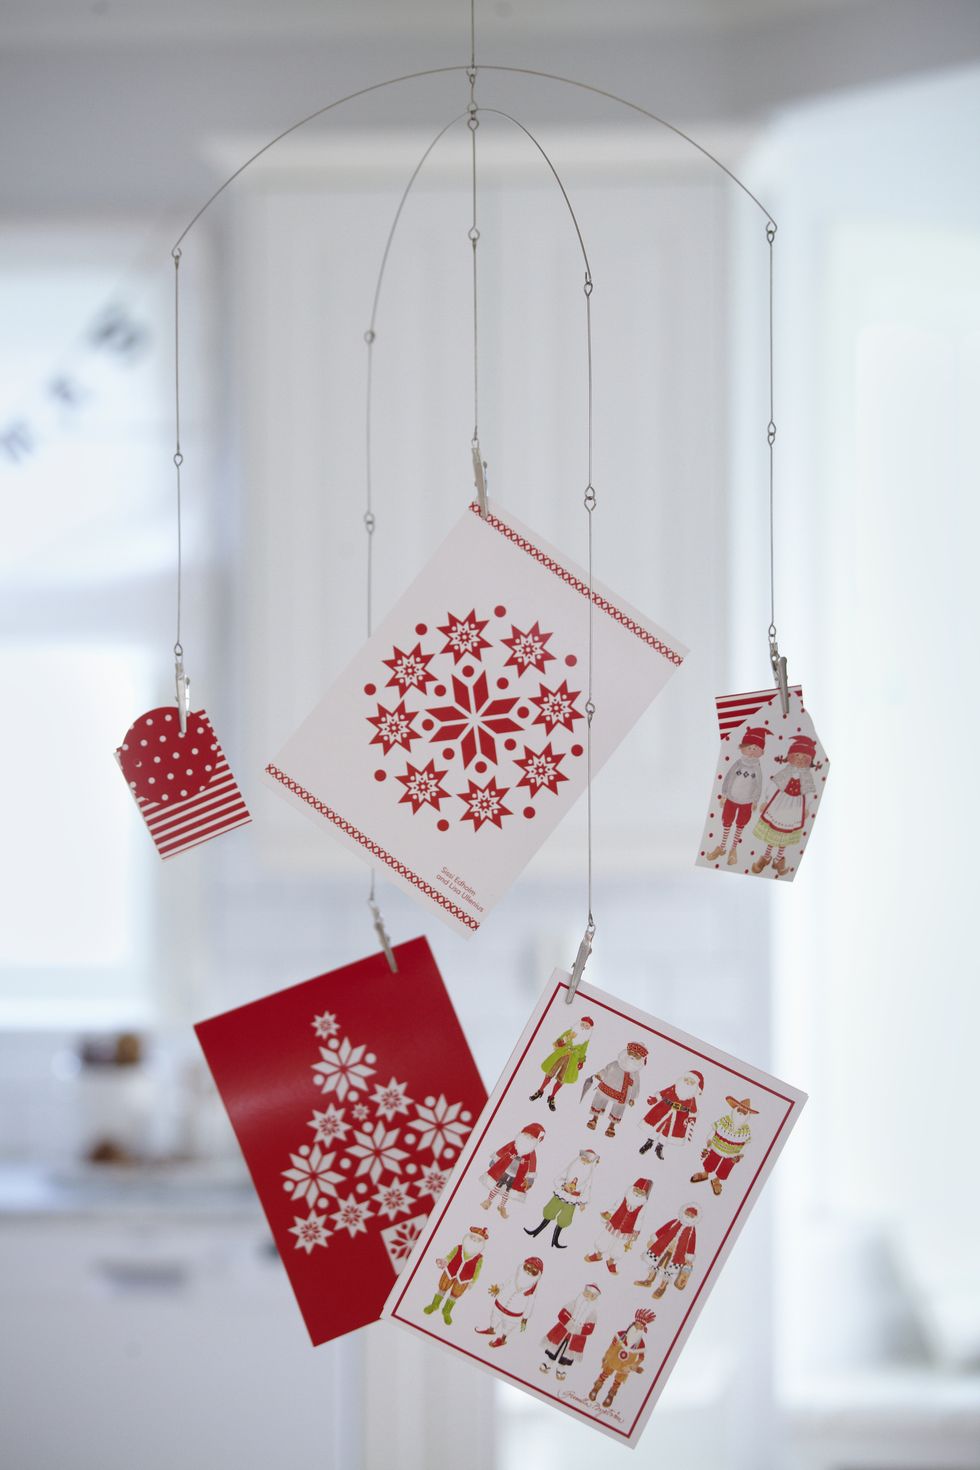 Hanging Christmas cards